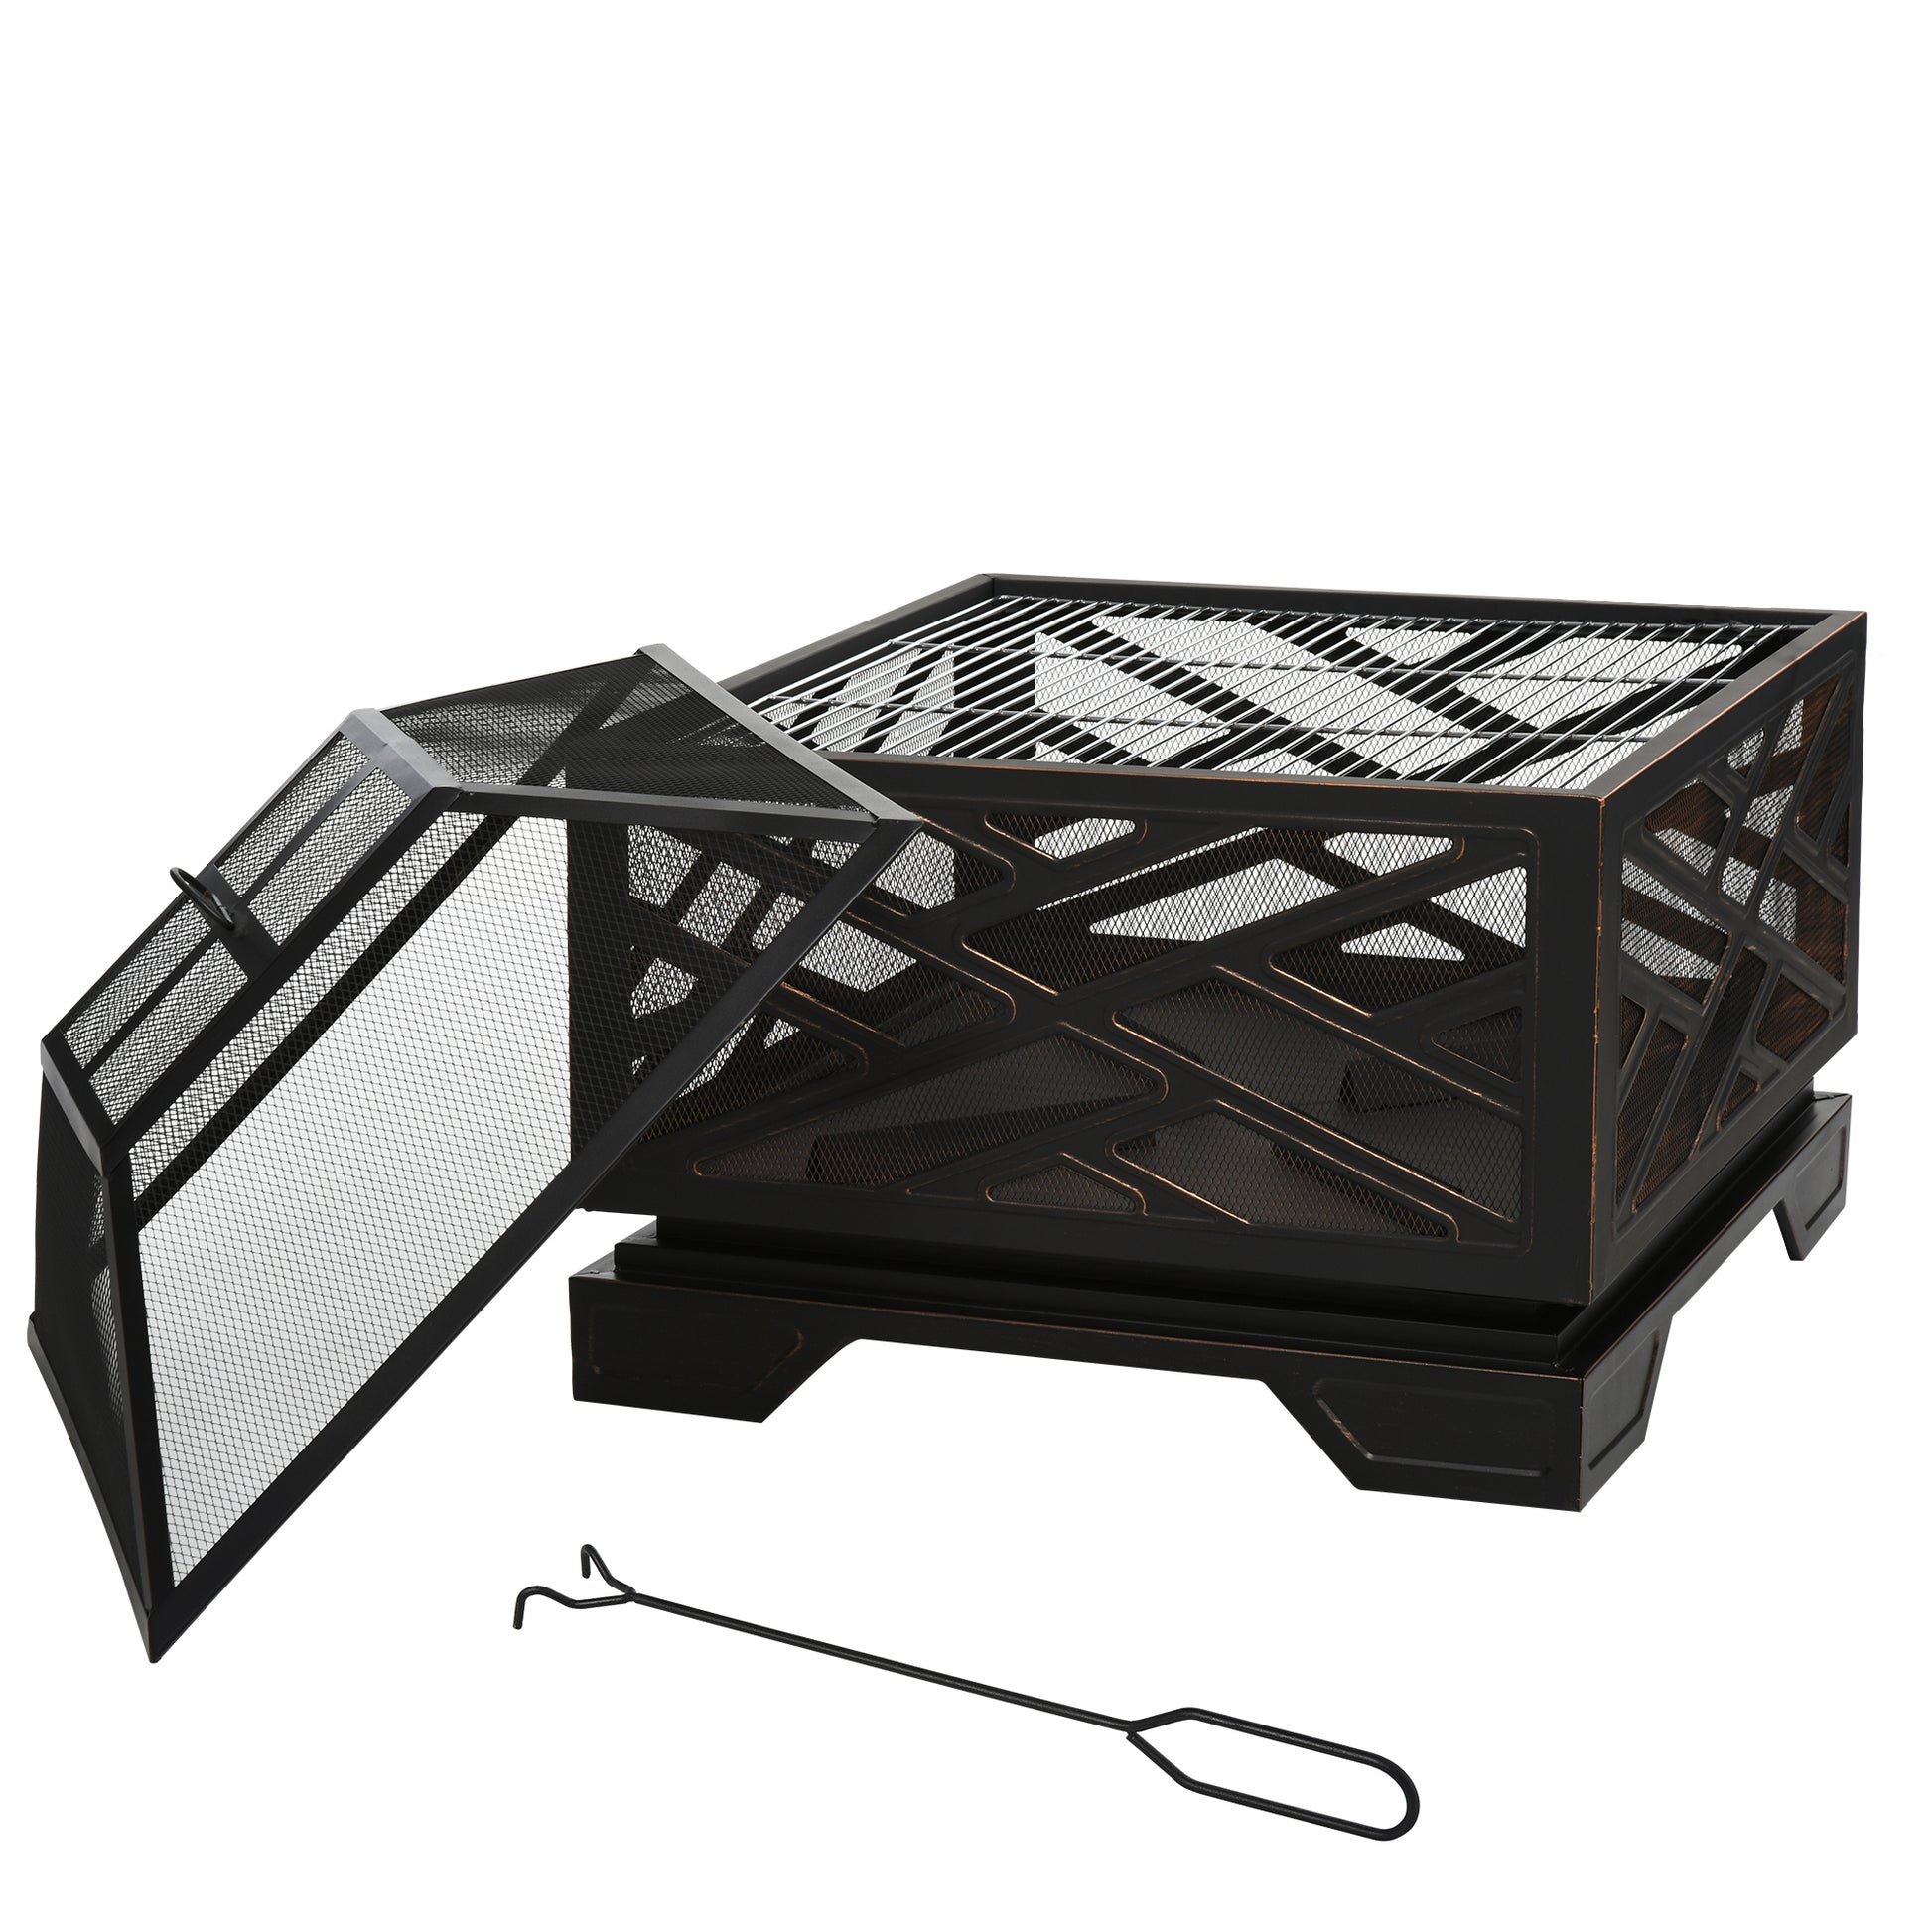 Outsunny 66cm 2 in 1 Square Fire Pit Metal Brazier for Garden, Patio with BBQ Grill Shelf & Spark Screen Cover & Poker, Black - OutdoorBox